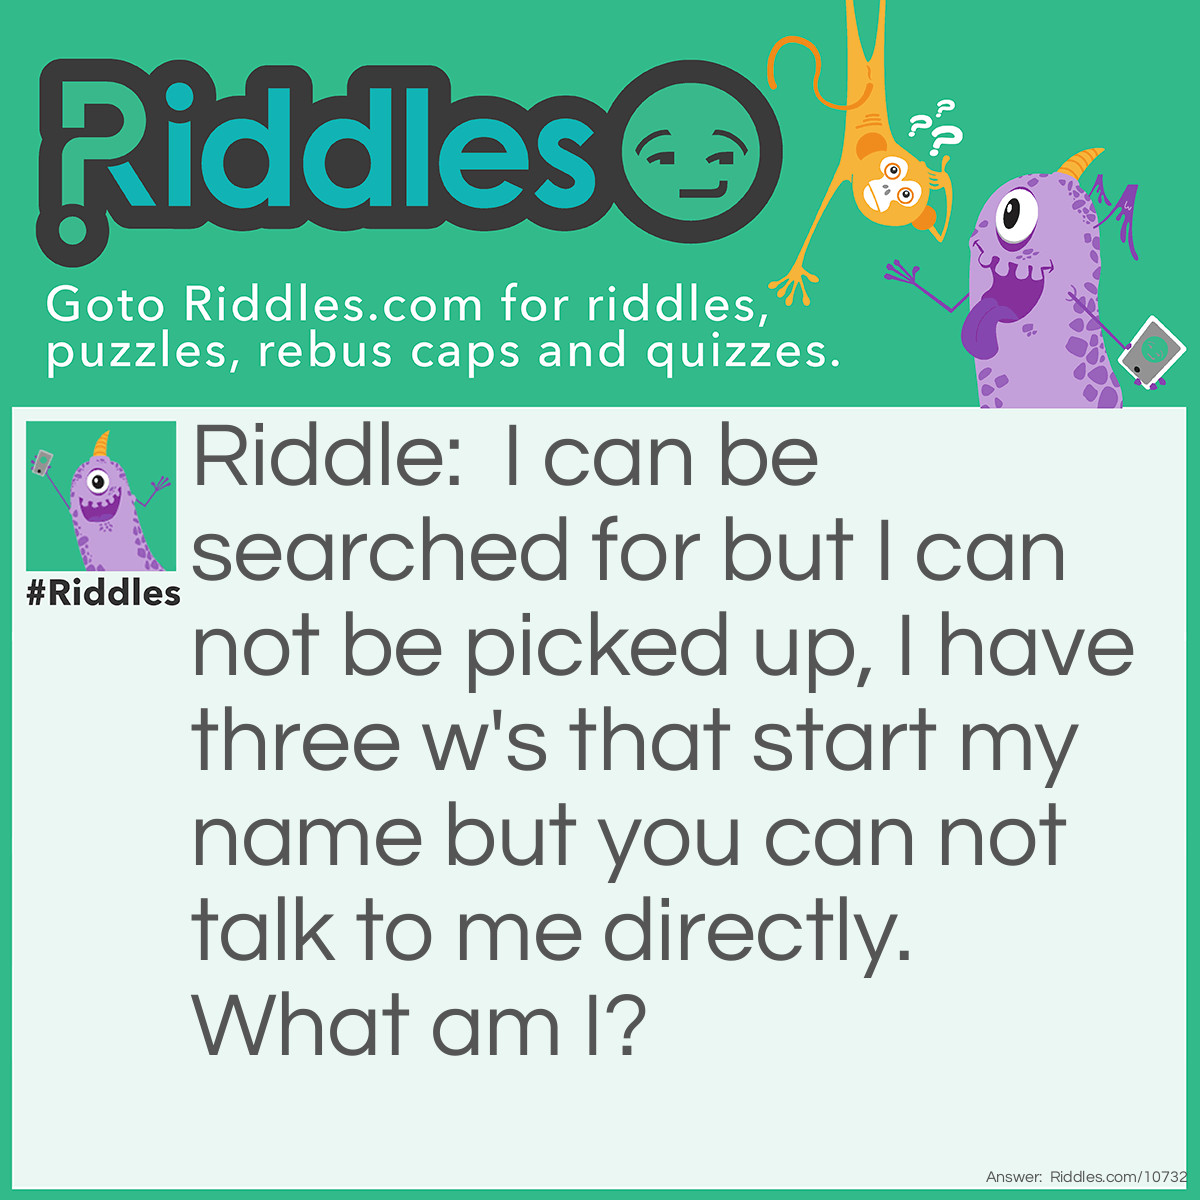 Riddle: I can be searched for but I can not be picked up, I have three w's that start my name but you can not talk to me directly. What am I? Answer: I am the internet.